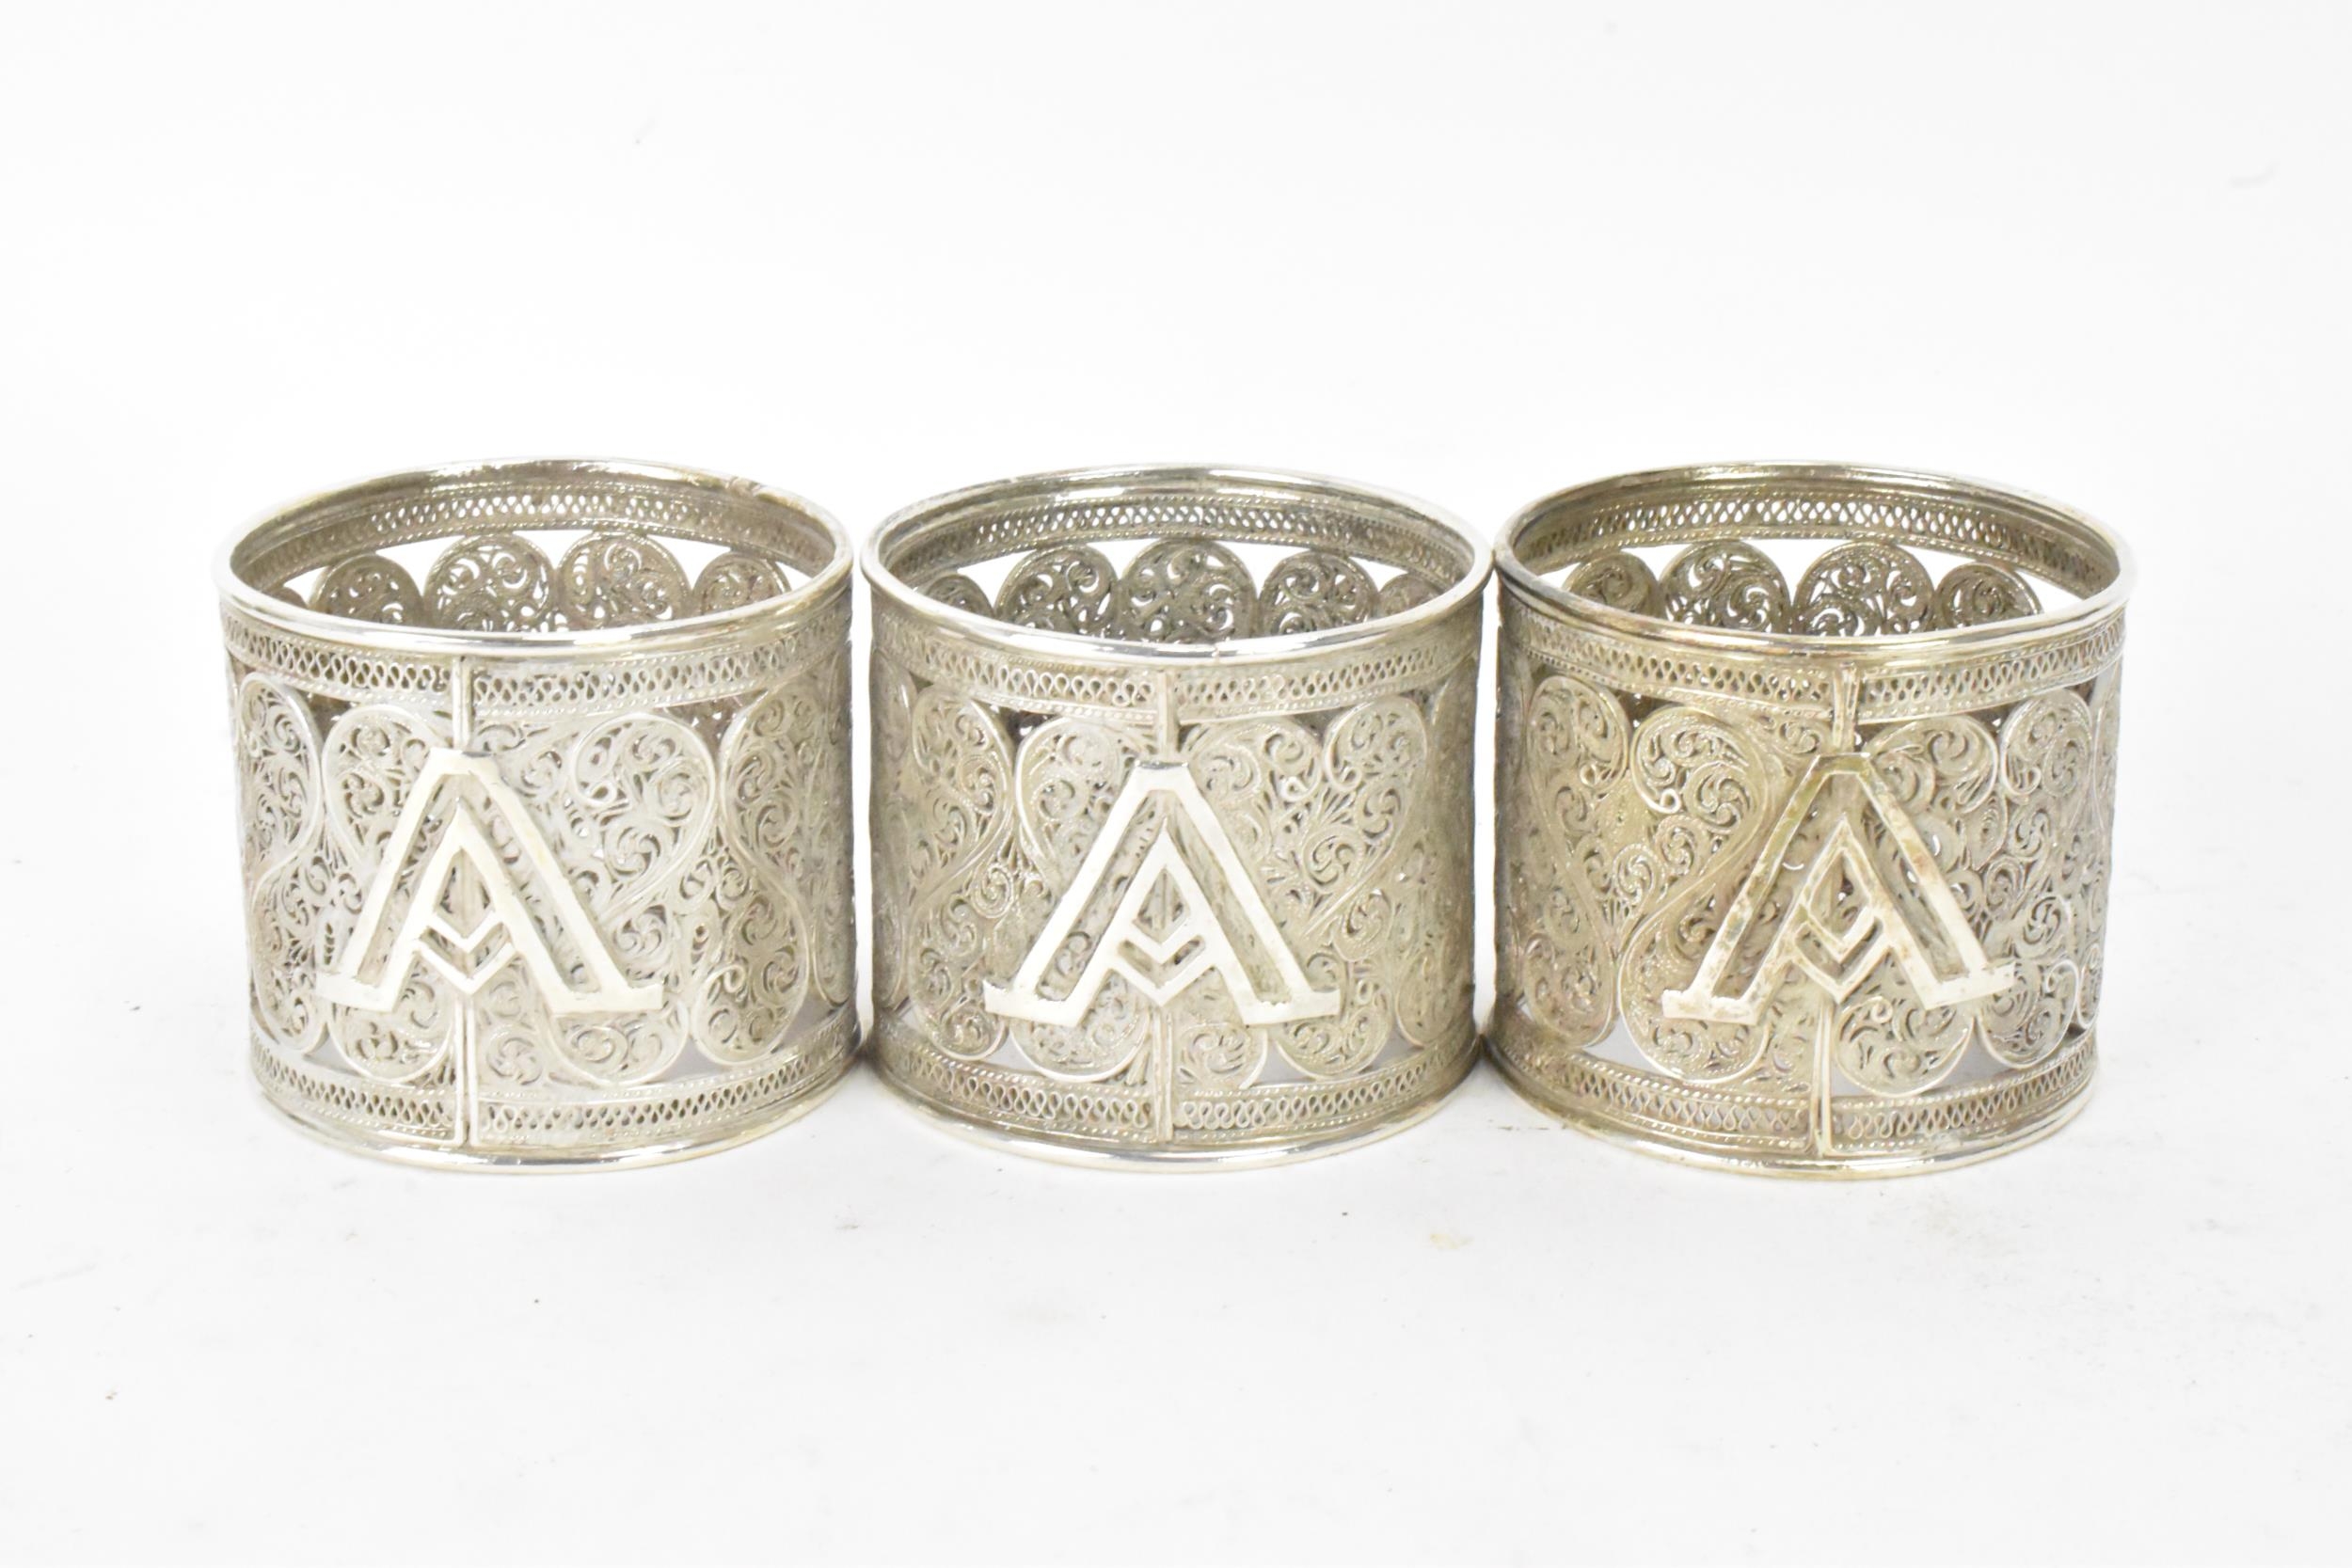 A set of six early 20th century Middle Eastern white metal filigree napkin rings, elaborately - Image 5 of 6